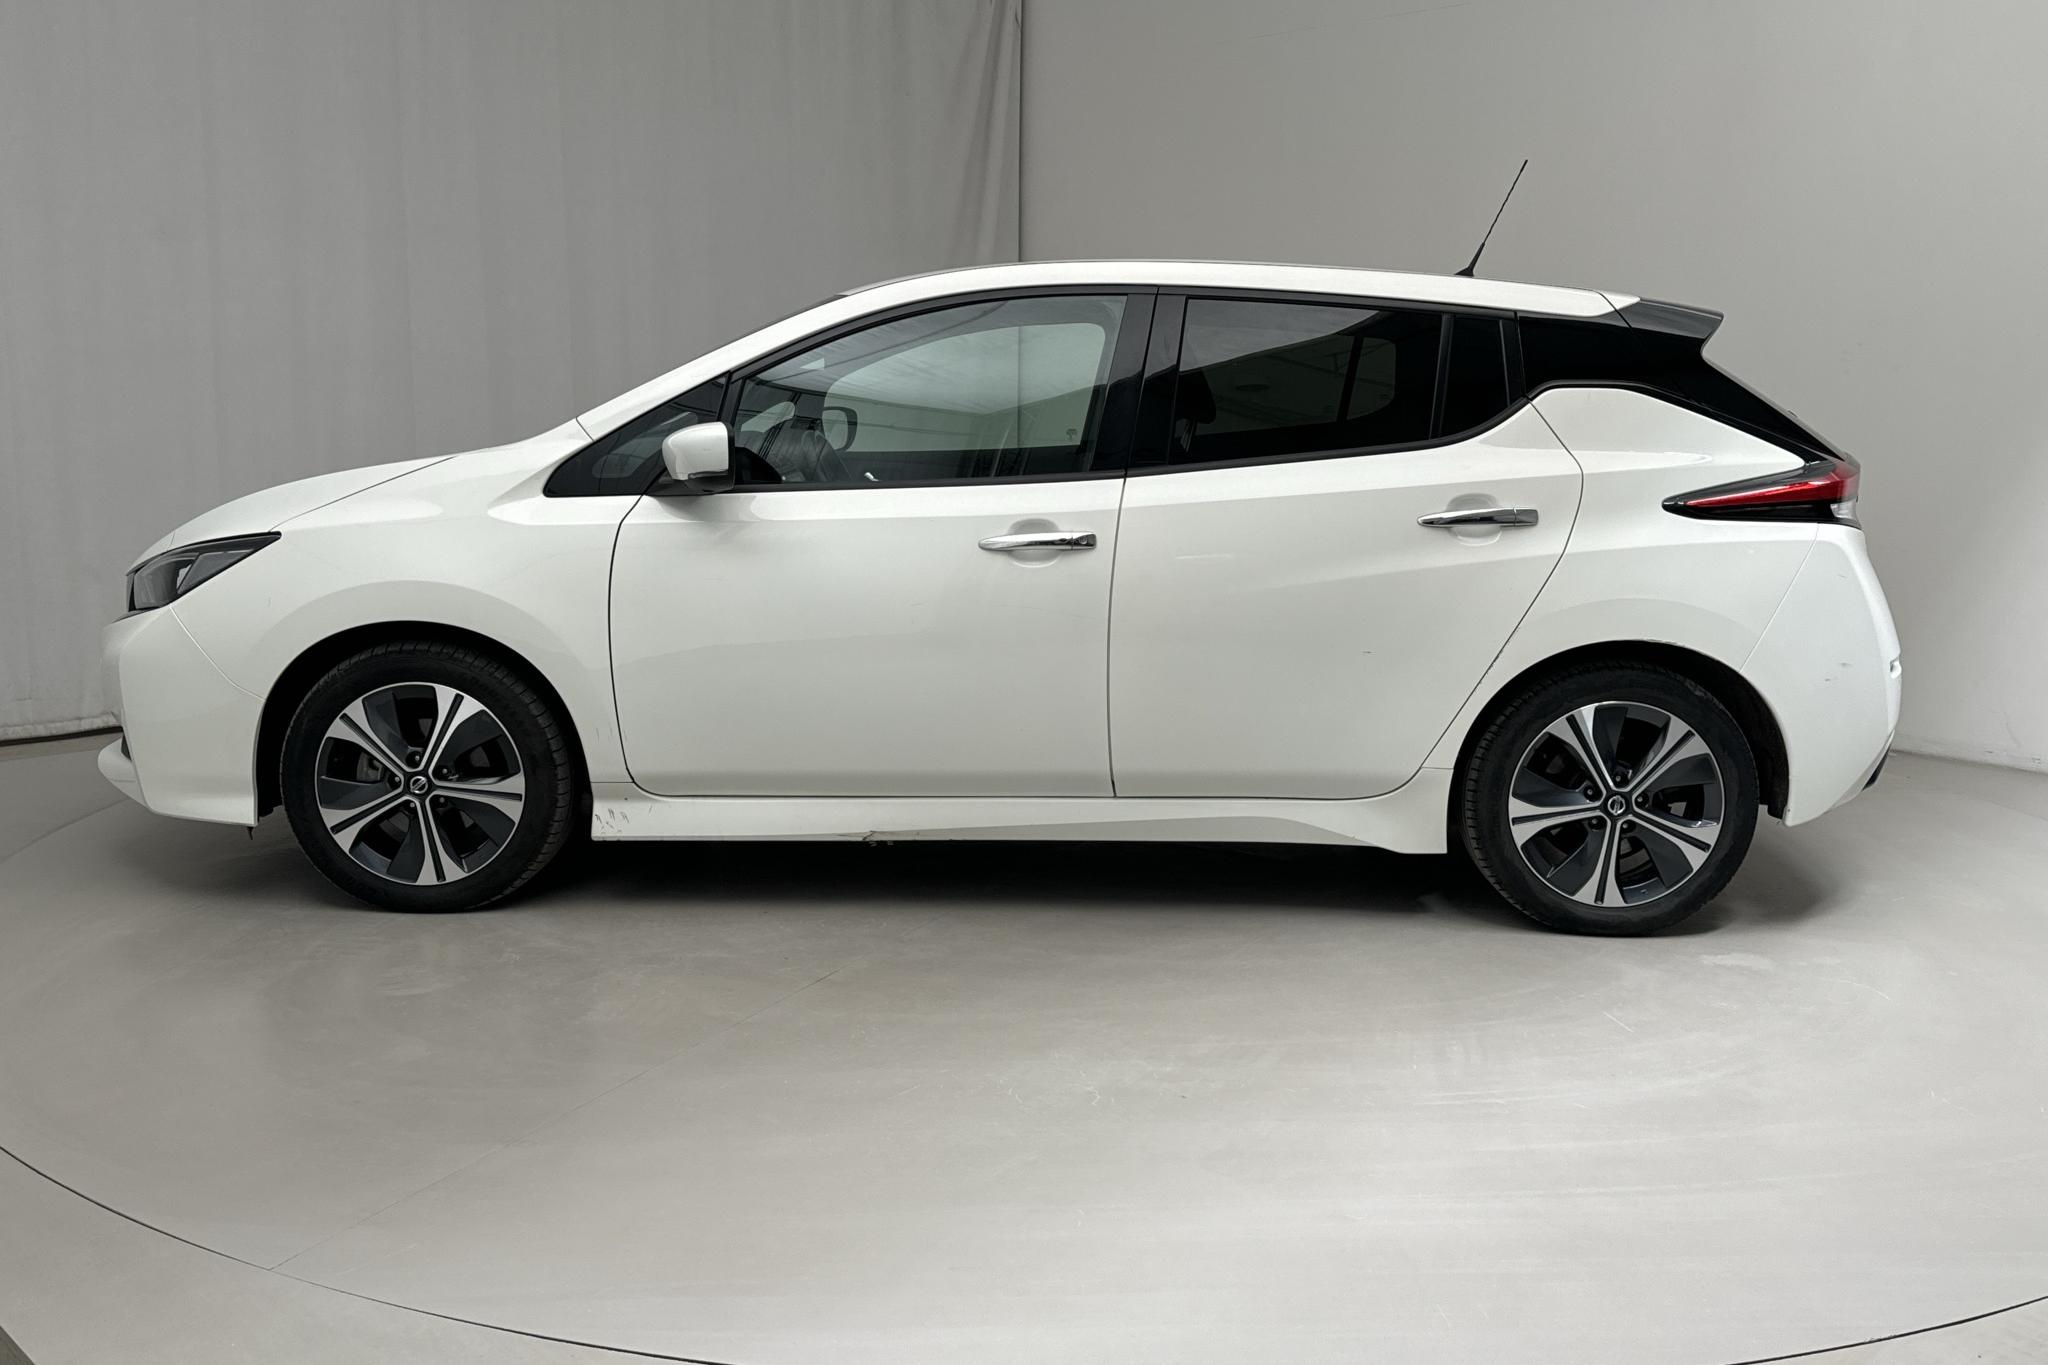 Nissan LEAF 5dr 39 kWh (150hk) - 46 770 km - Automatic - white - 2021